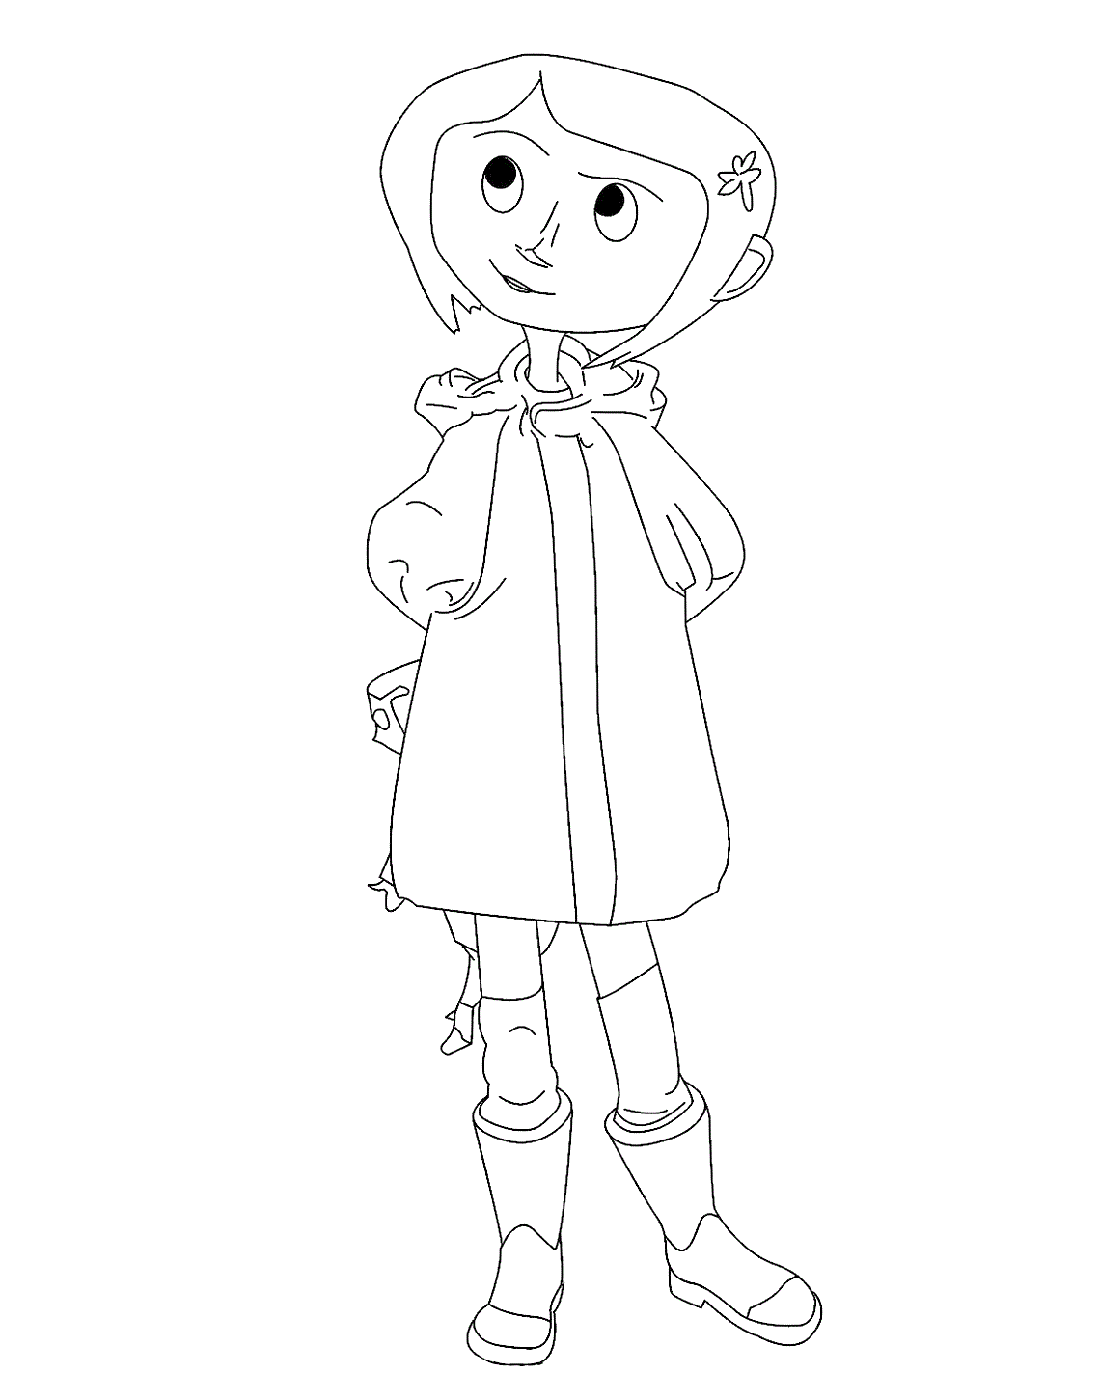 Coraline coloring pages educative printable coraline drawing cartoon coloring pages coloring books